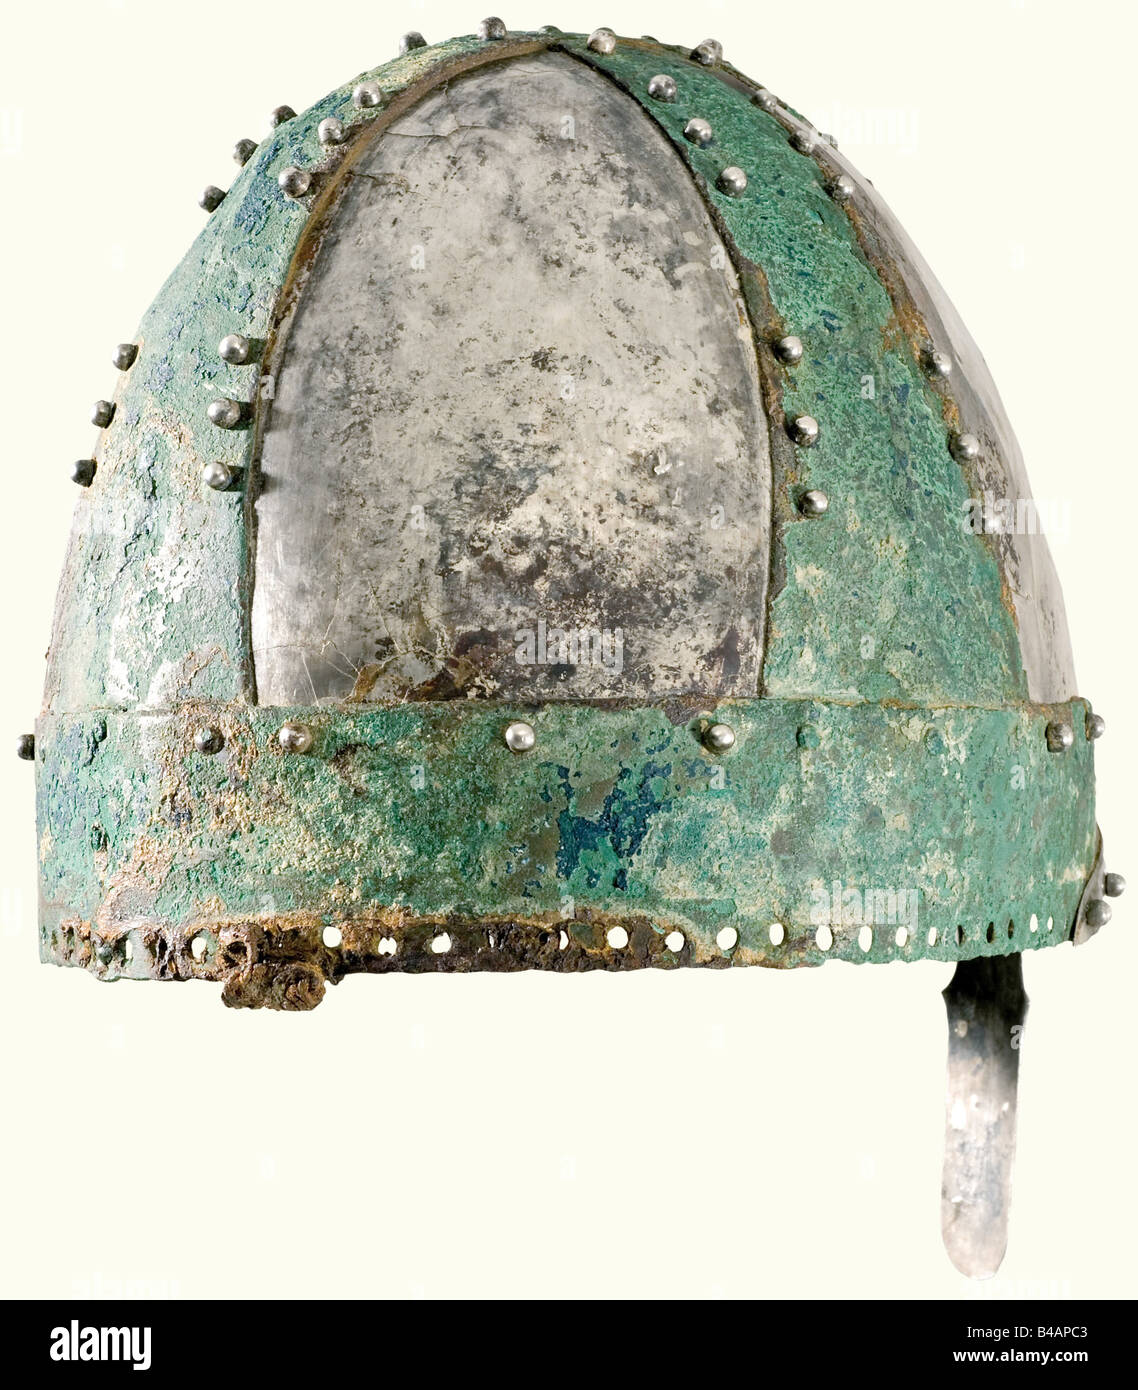 A princely 'Spangenhelm', Central and Eastern Europe, 5th - 6th century A.D. Bronze, calotte-shaped, segmented helmet with riveted silver plates. The pierced forehead b historic, historical, ancient world, ancient world, ancient times, object, objects, stills, clipping, cut out, cut-out, cut-outs, Stock Photo